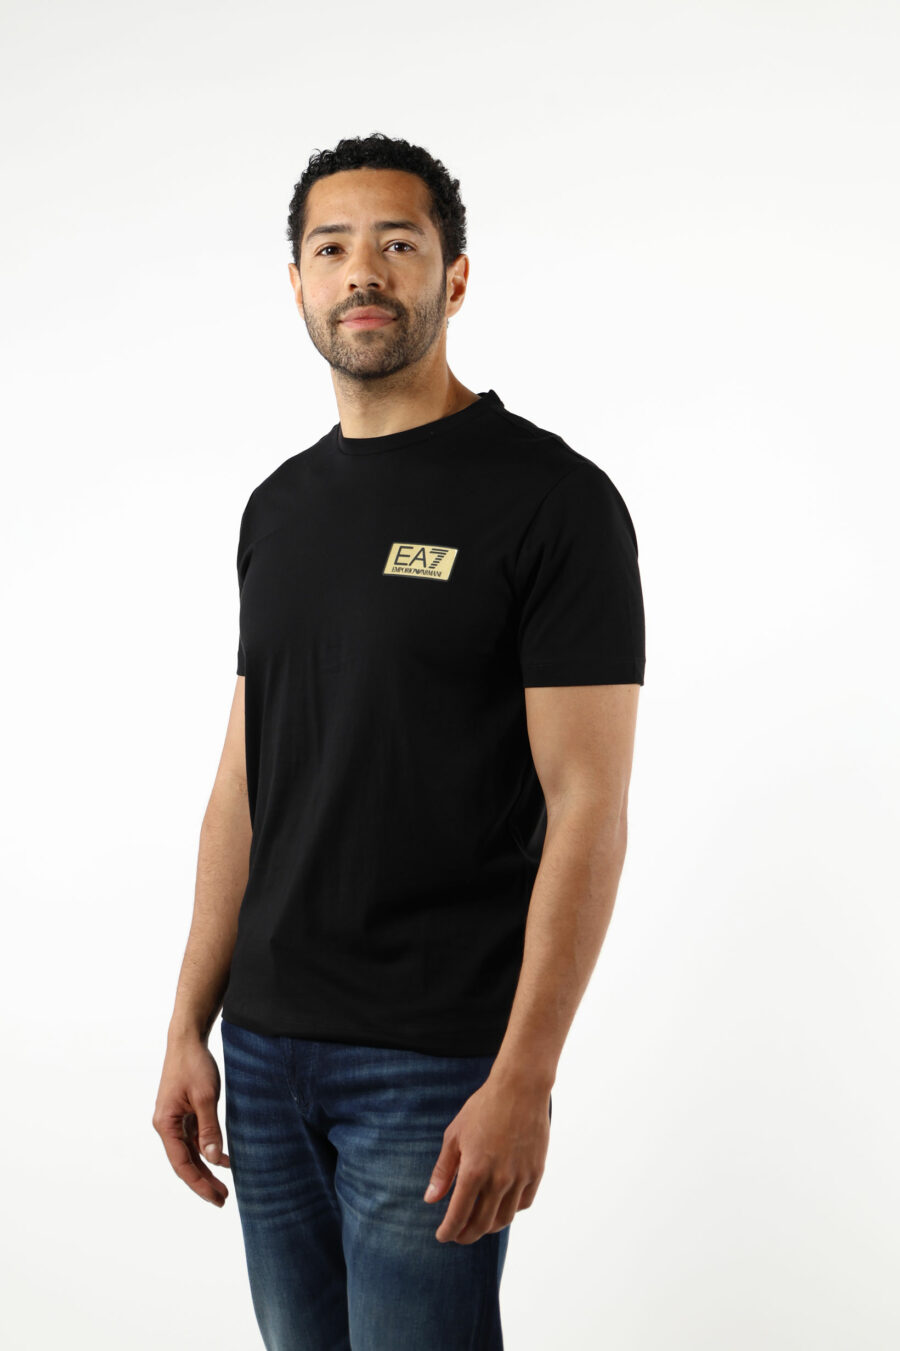 Black T-shirt with black "lux identity" minilogue on gold plate - 110813